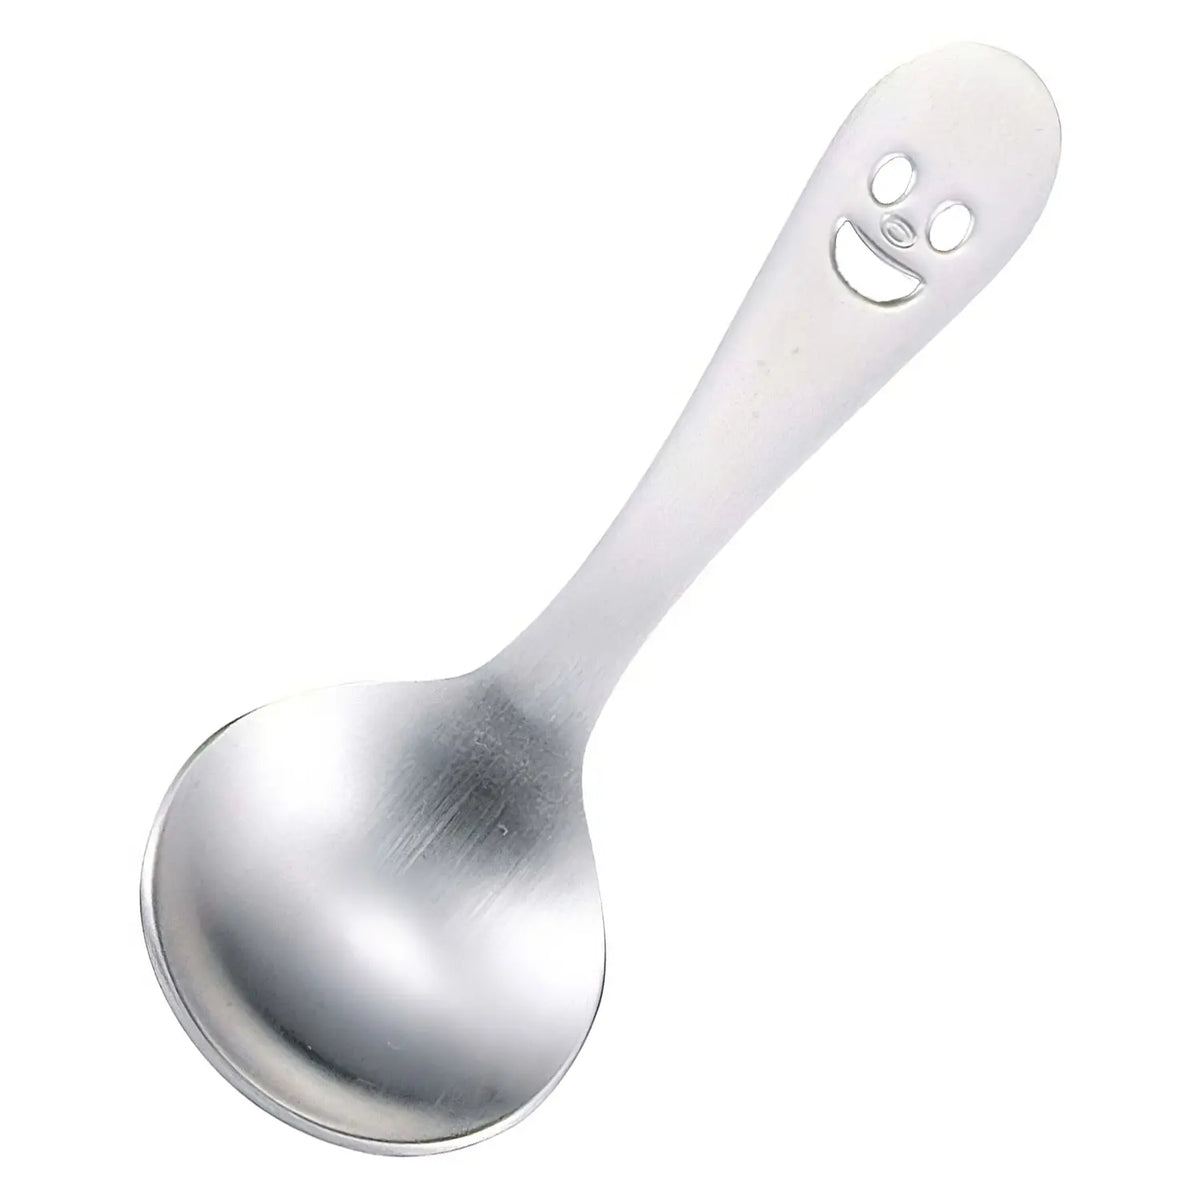 Wada Corporation Nico Stainless Steel Petit Candy Spoon 9.8cm